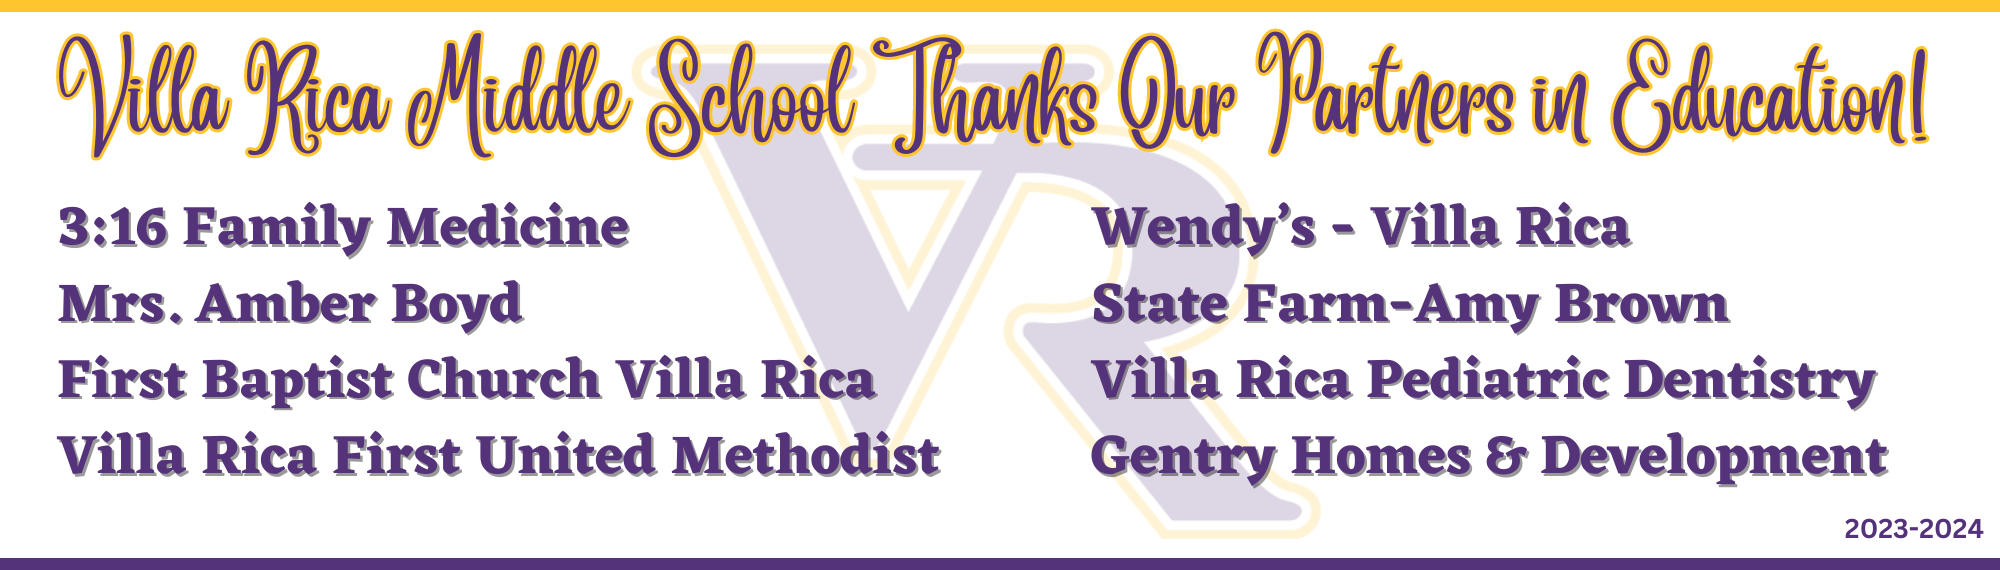 Villa Rica Middle School Thanks Our Partners in Education! 3:16 Family Medicine Mrs. Amber Boyd First Baptist Church Villa Rica Villa Rica First United Methodist Wendy’s - Villa Rica State Farm-Amy Brown Villa Rica Pediatric Dentistry-Gentry Homes and Development